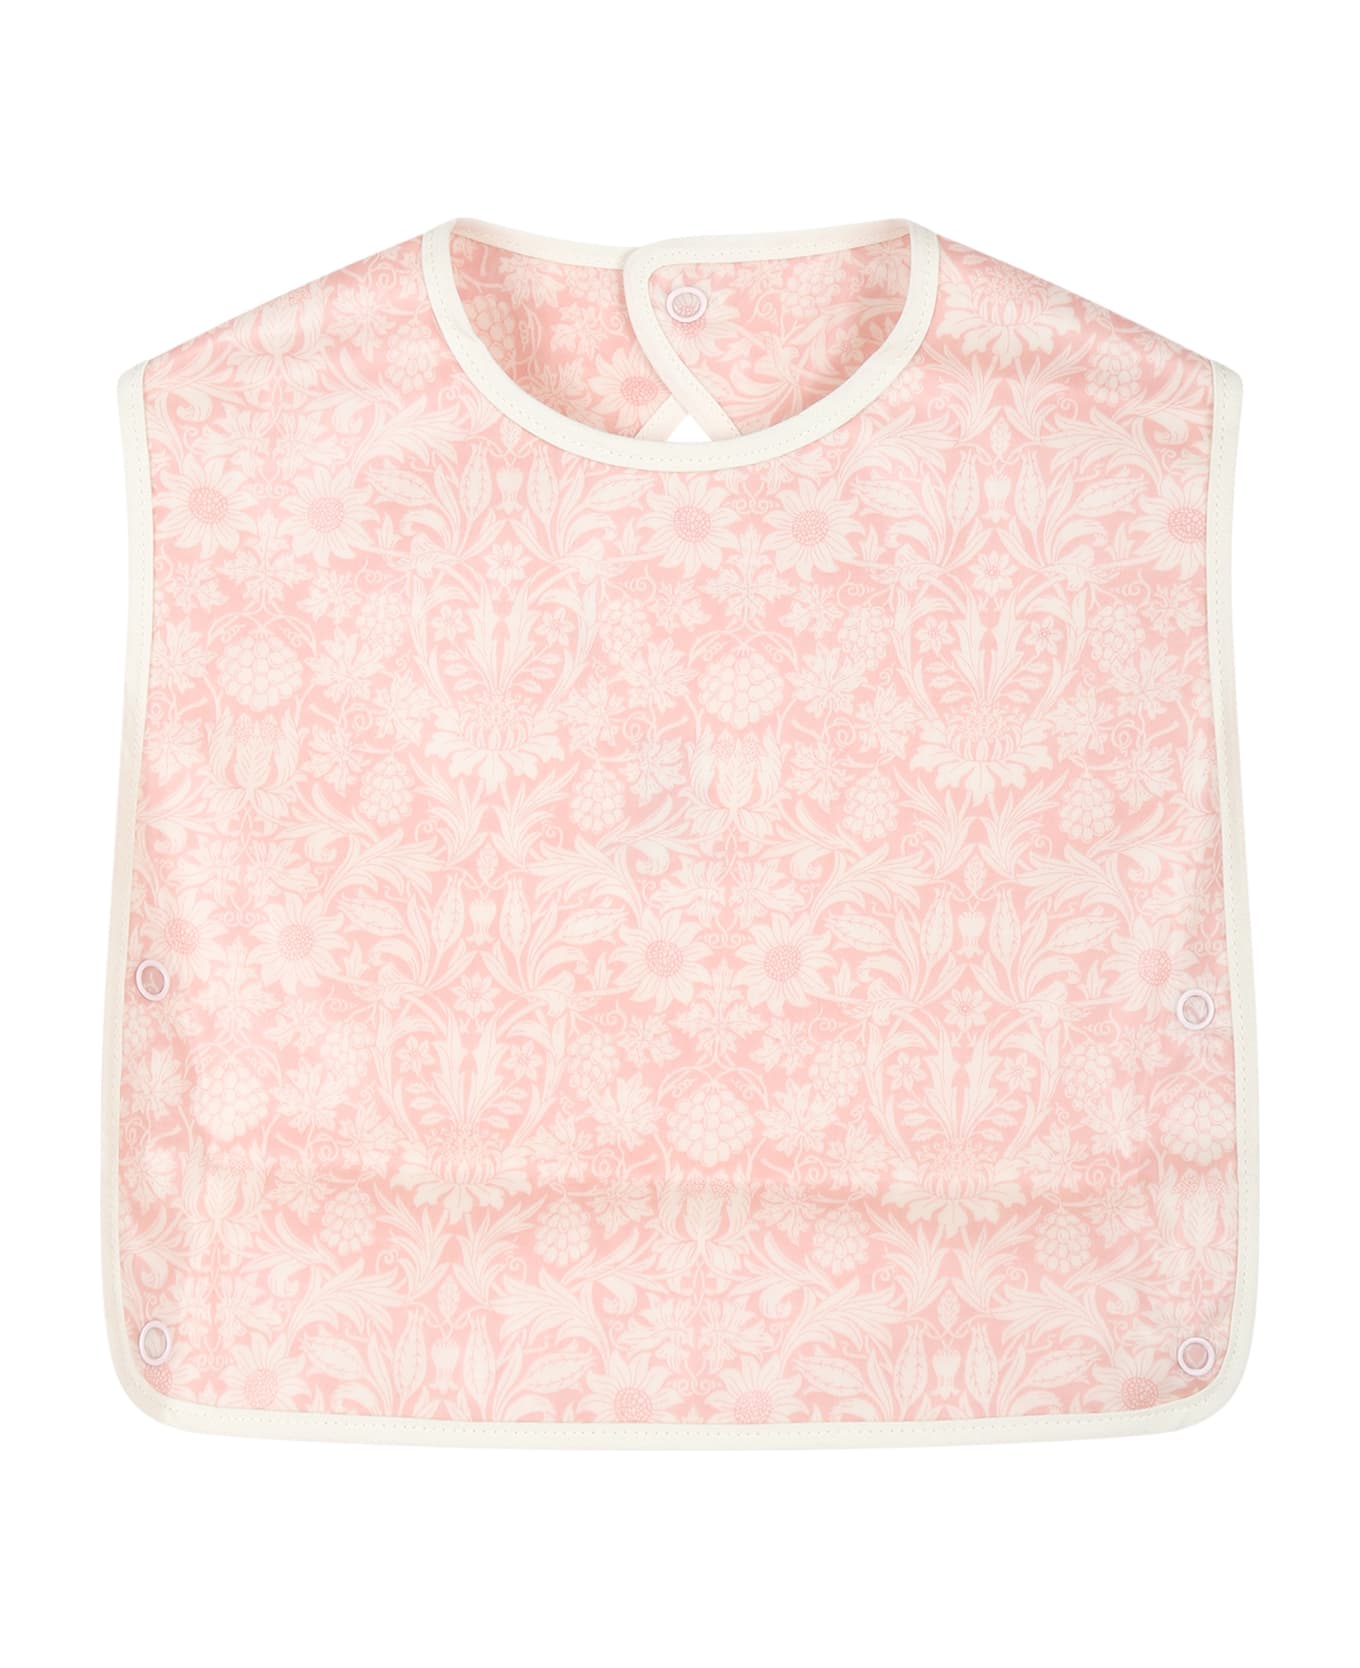 Bonpoint Pink Bib For Baby Girl With Flower Print - Pink